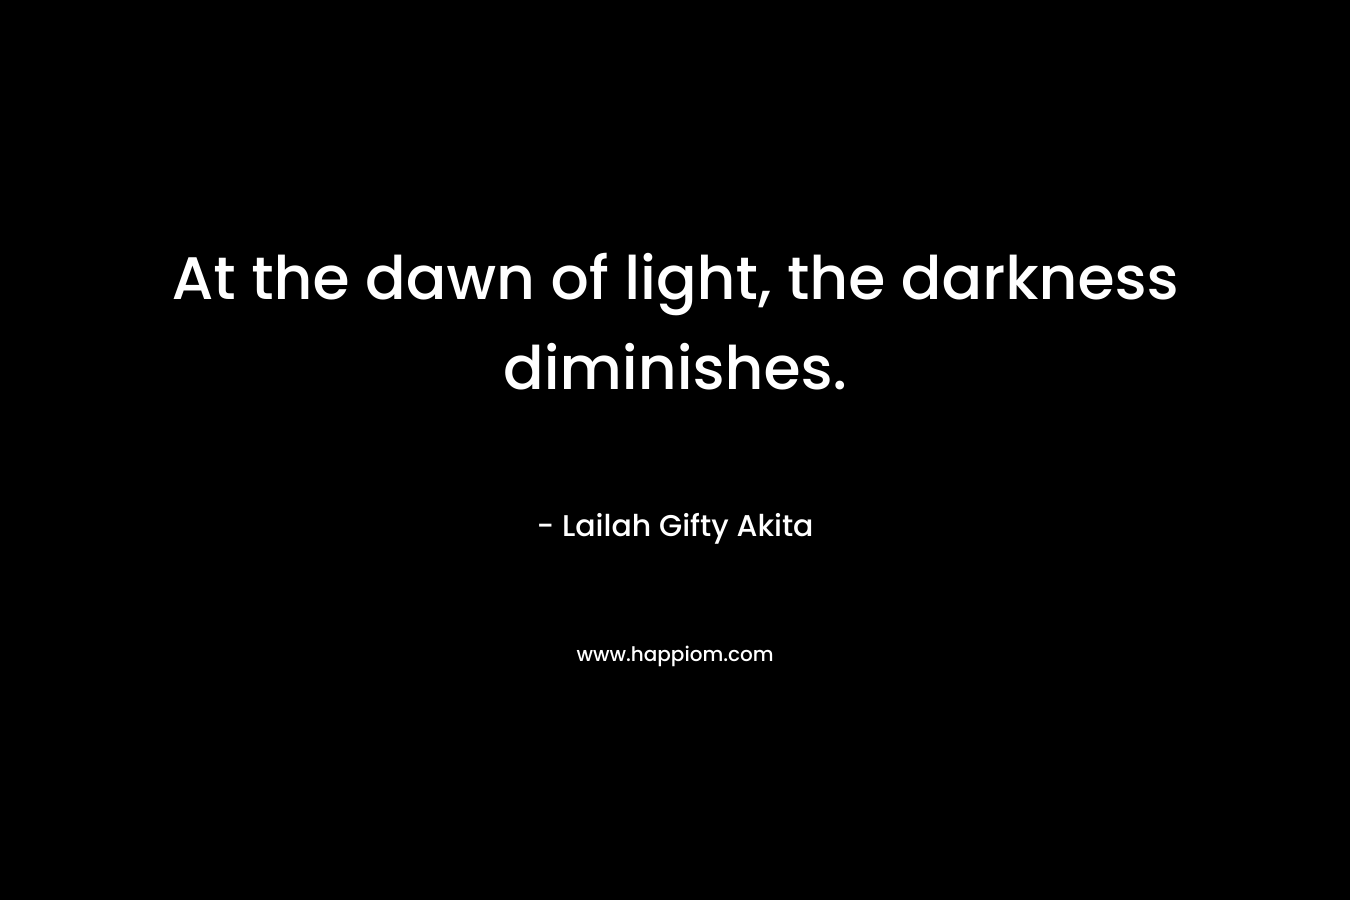 At the dawn of light, the darkness diminishes.